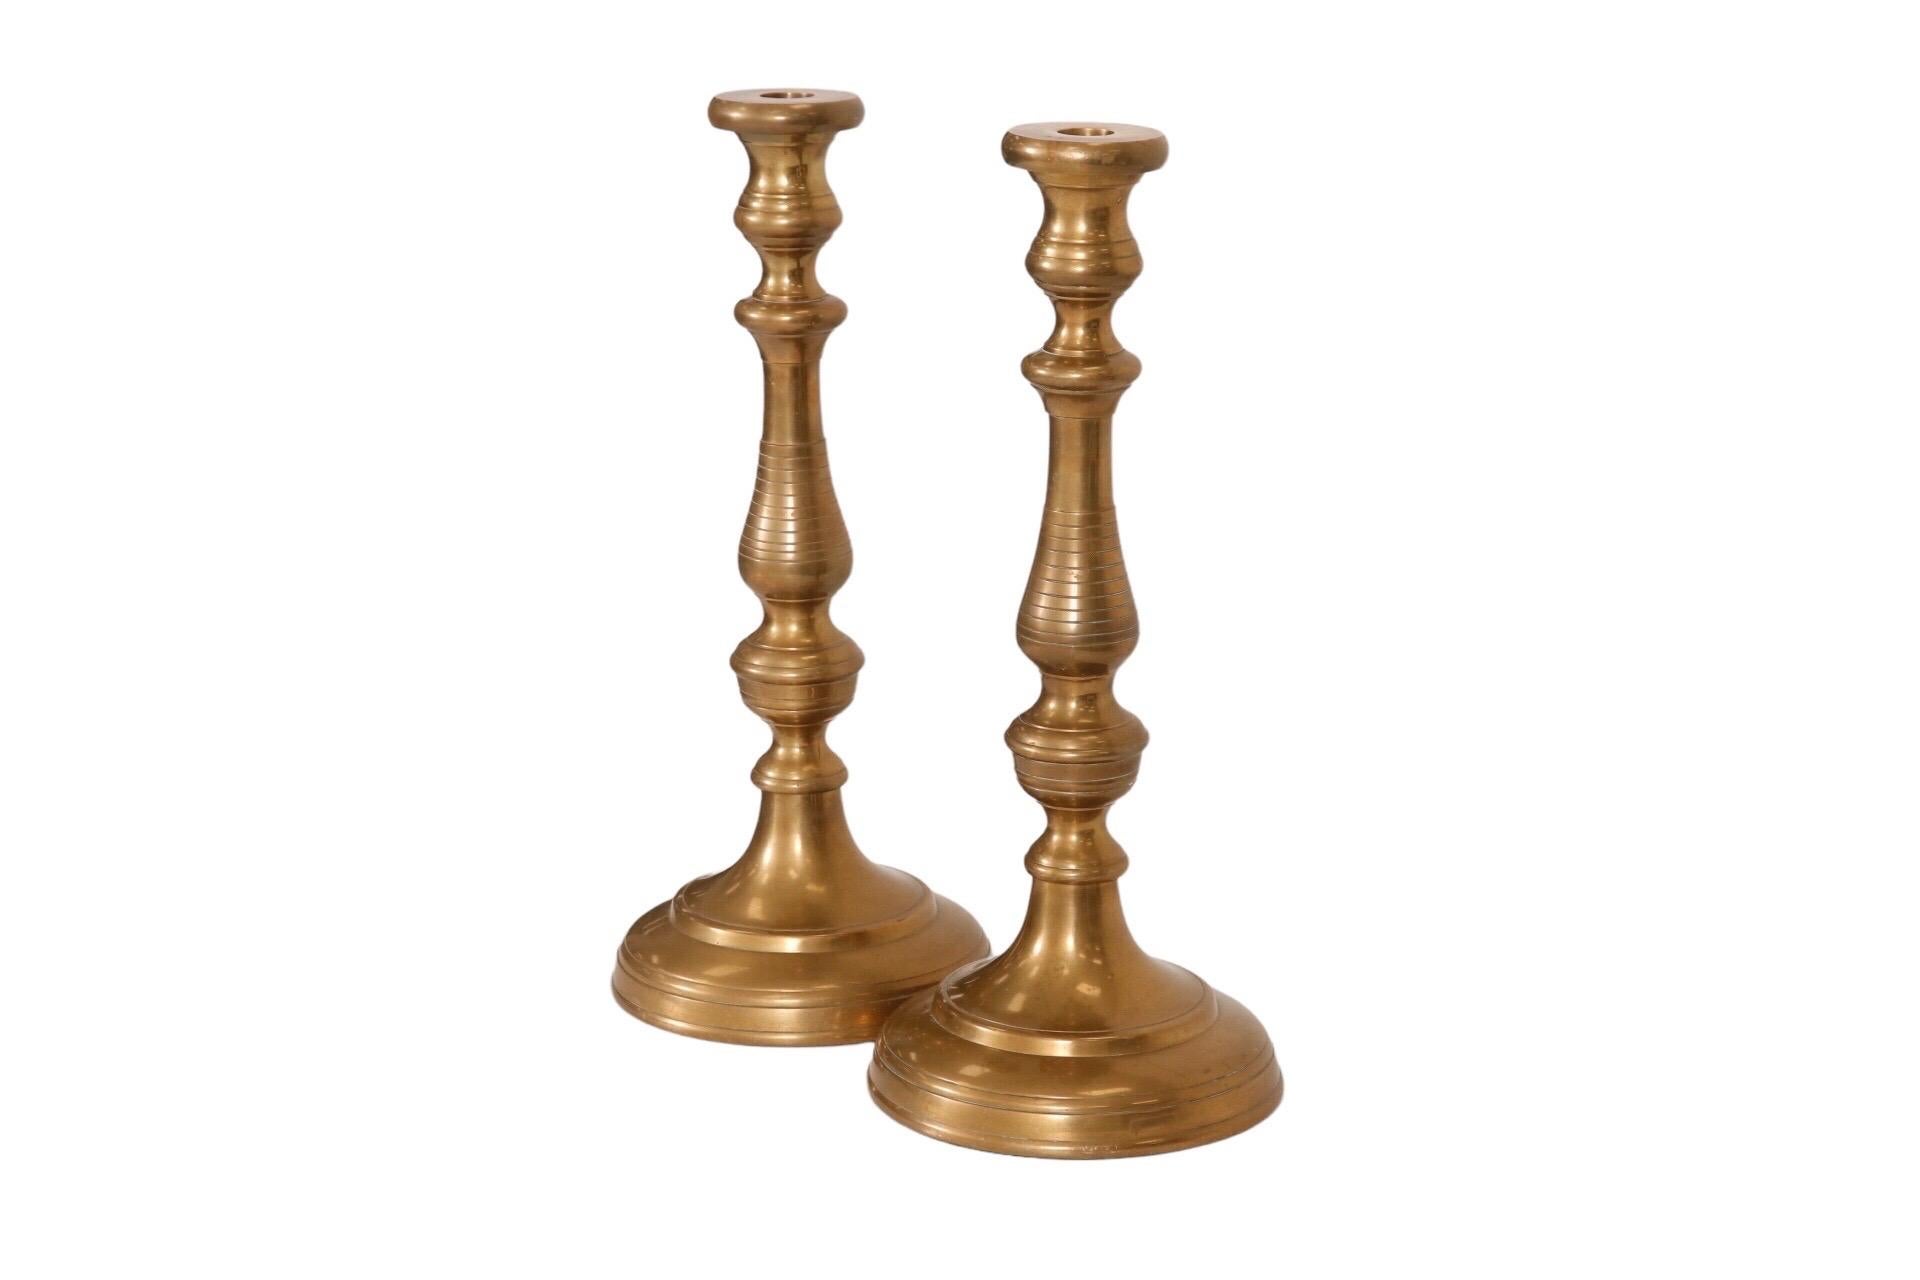 A large pair of turned brass candlesticks. Recessed sockets sit atop turned capitals and columns on round bases. Dimensions per candlestick.
 